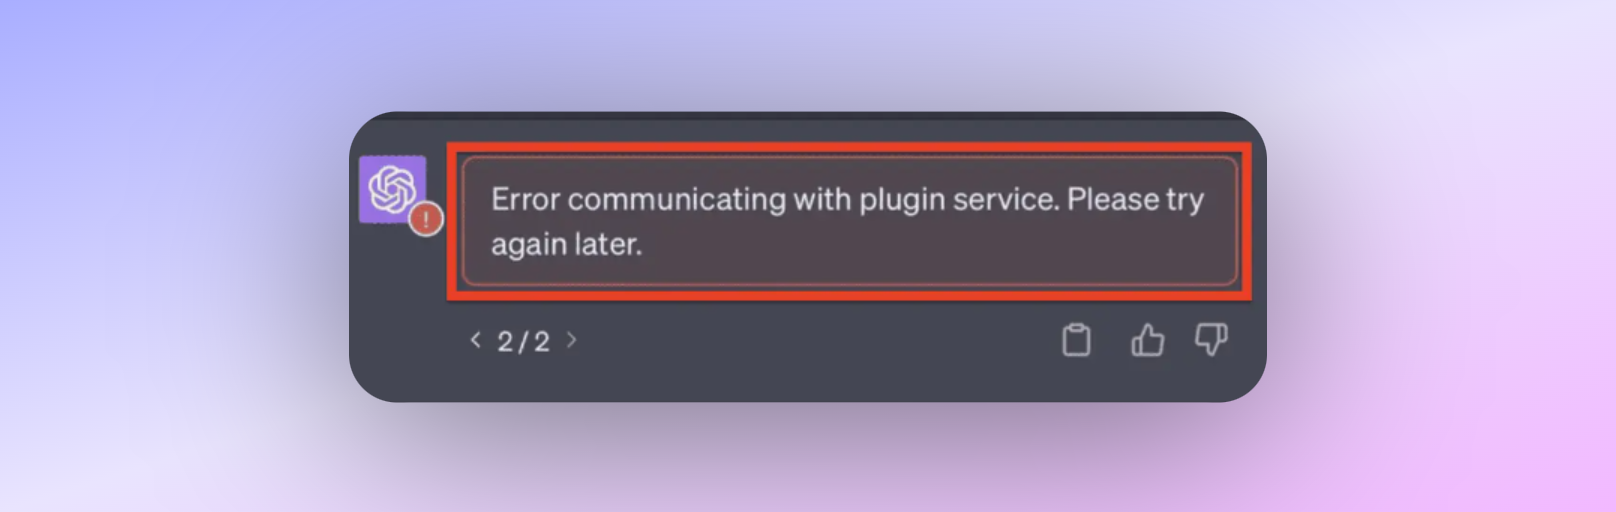 Tired of seeing the 'Error communicating with plugin service. Please try again later' message? This guide offers a deep dive into understanding and fixing this common but frustrating issue.